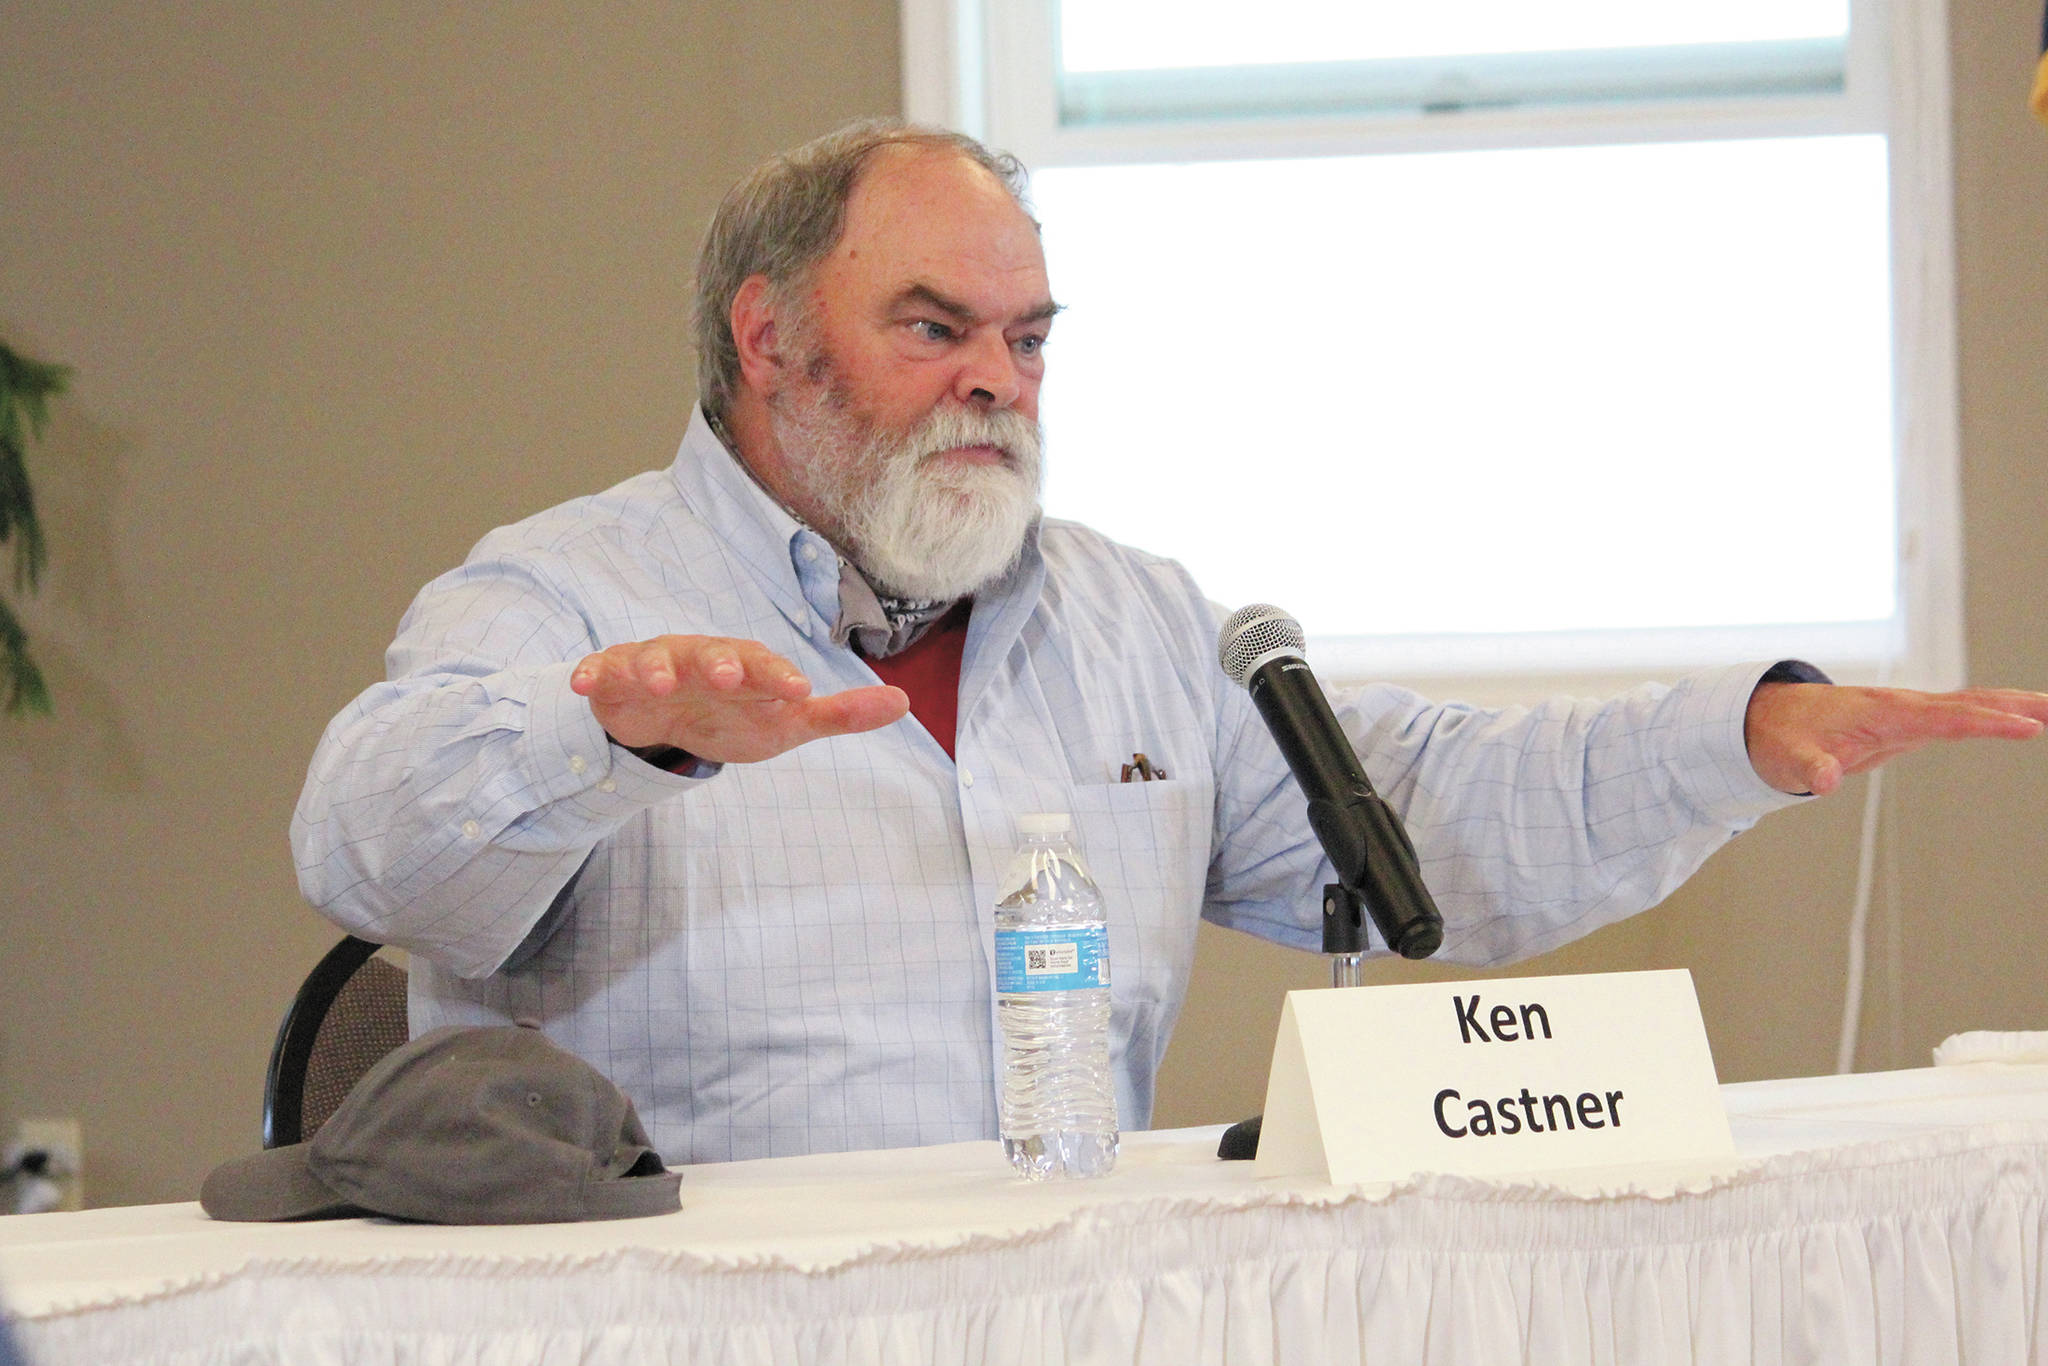 Homer Mayor Ken Castner, who is running for reelection, speaks during a candidate forum held Thursday, Sept. 24, 2020 by the Homer Chamber of Commerce & Visitor Center at Land’s End Resort in Homer, Alaska. (Photo by Megan Pacer/Homer News)